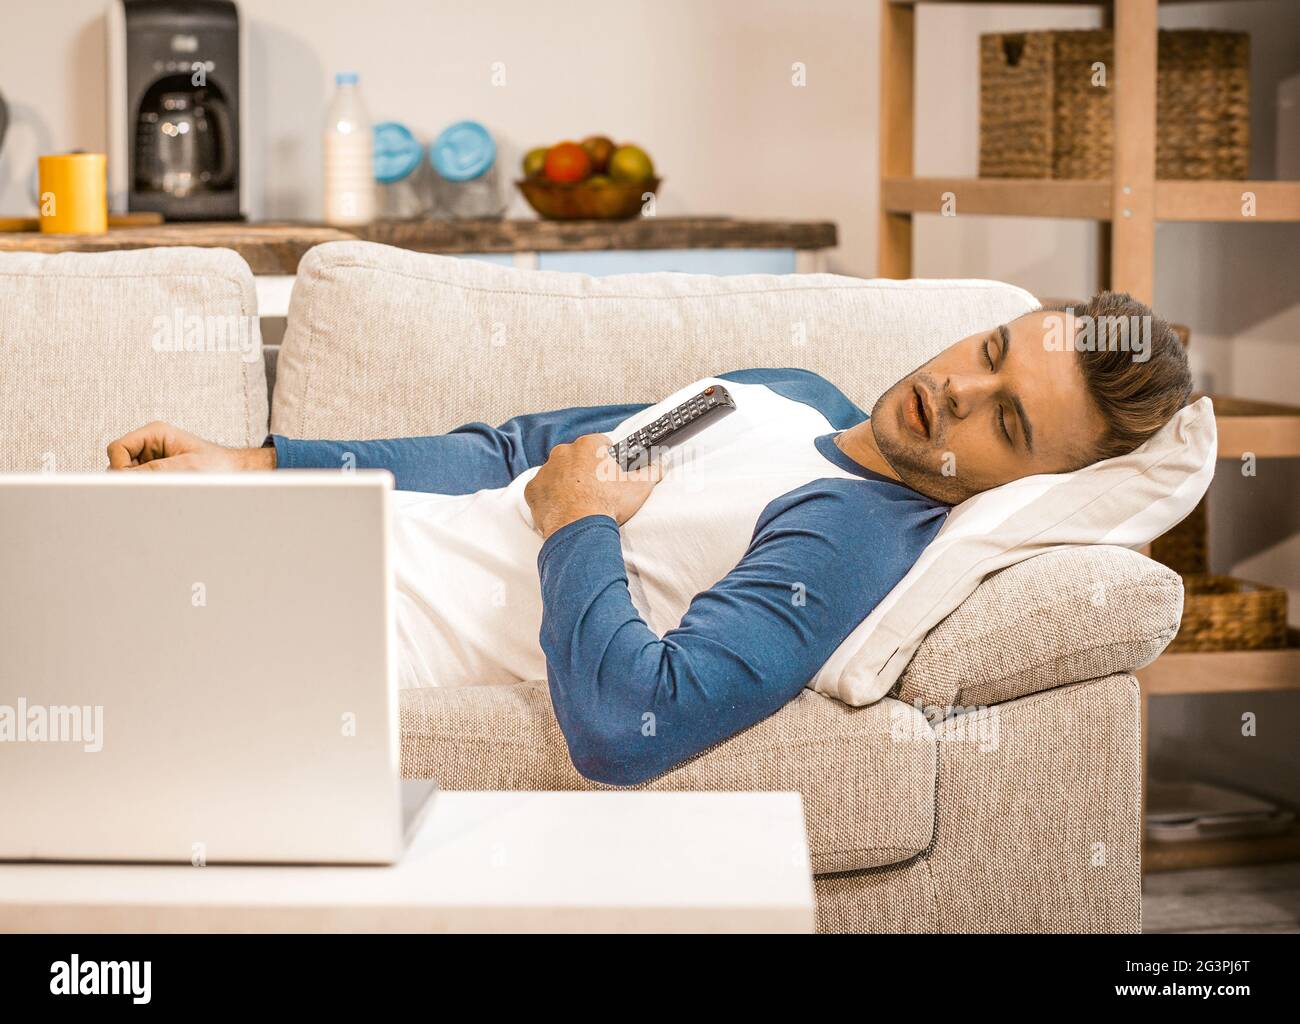 Male Domestic Life And Relaxation On Sofa At Home Stock Photo